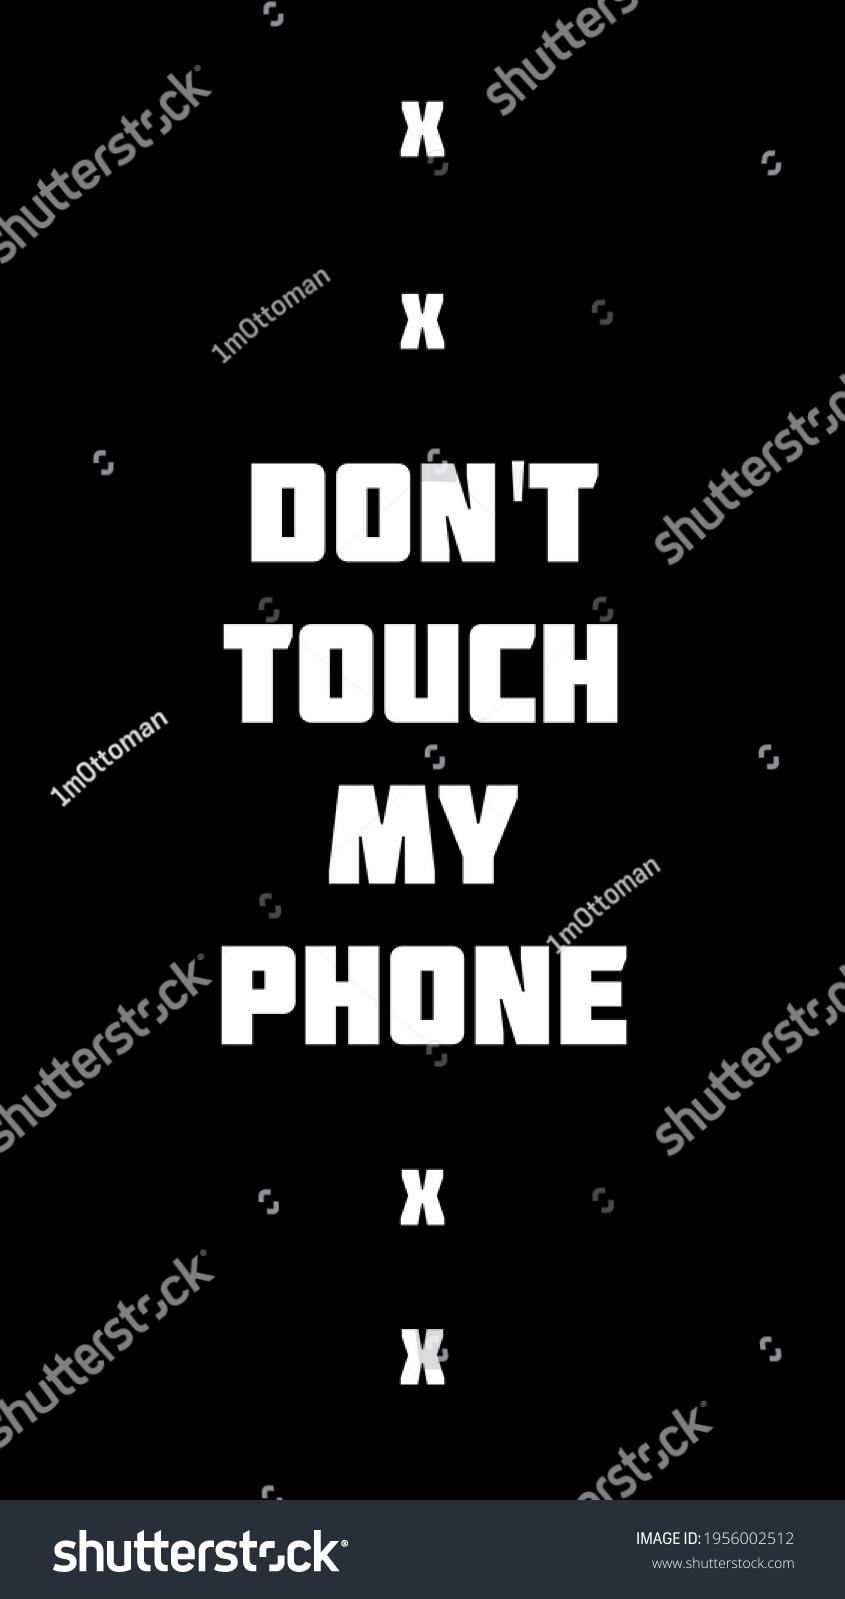 Fun Theme Don't Touch My Phone APK cho Android - Tải về